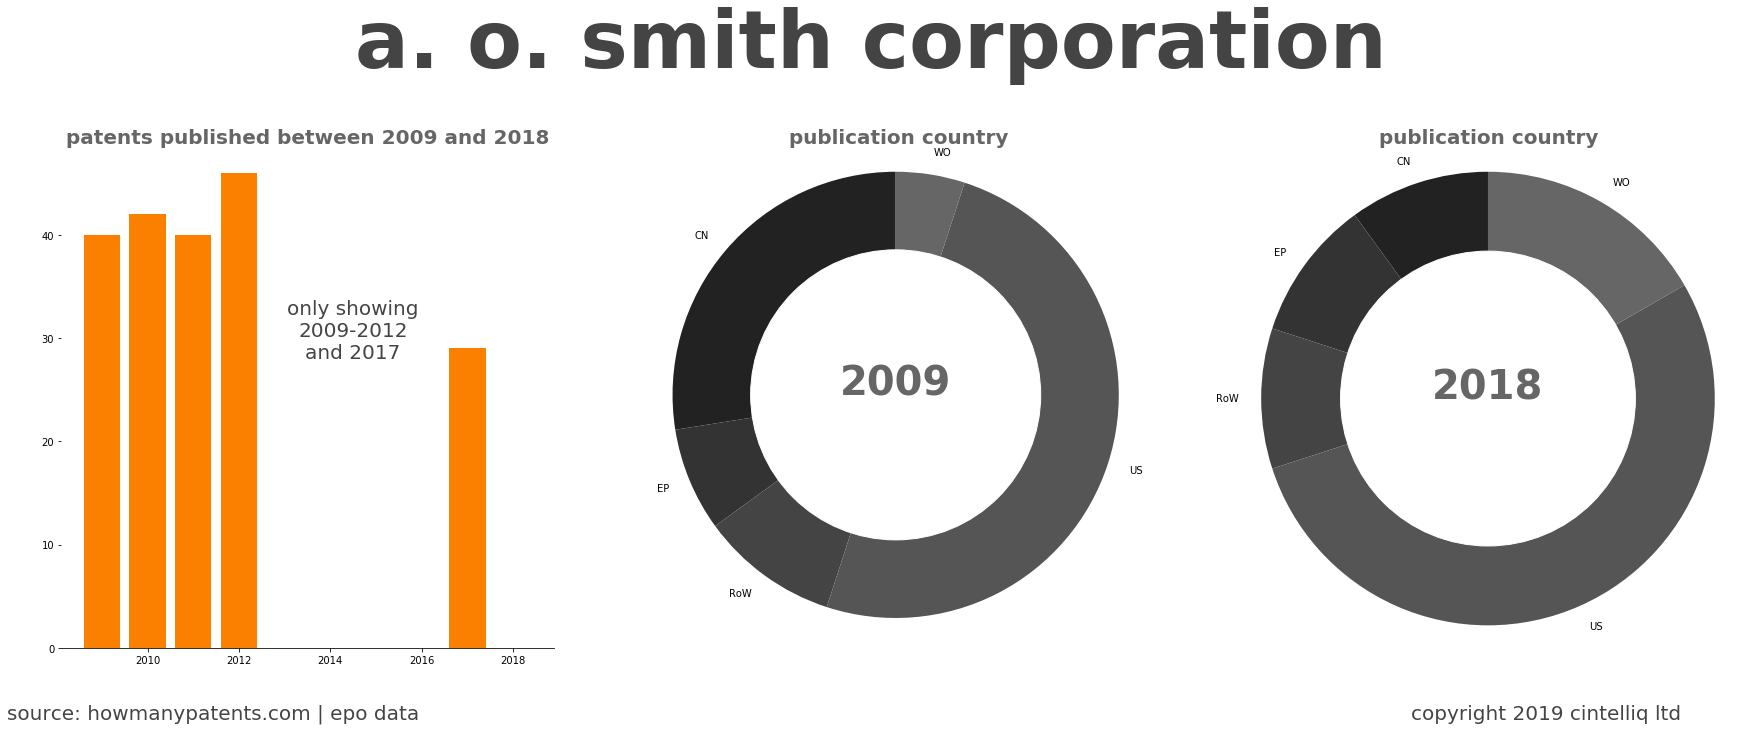 summary of patents for A. O. Smith Corporation